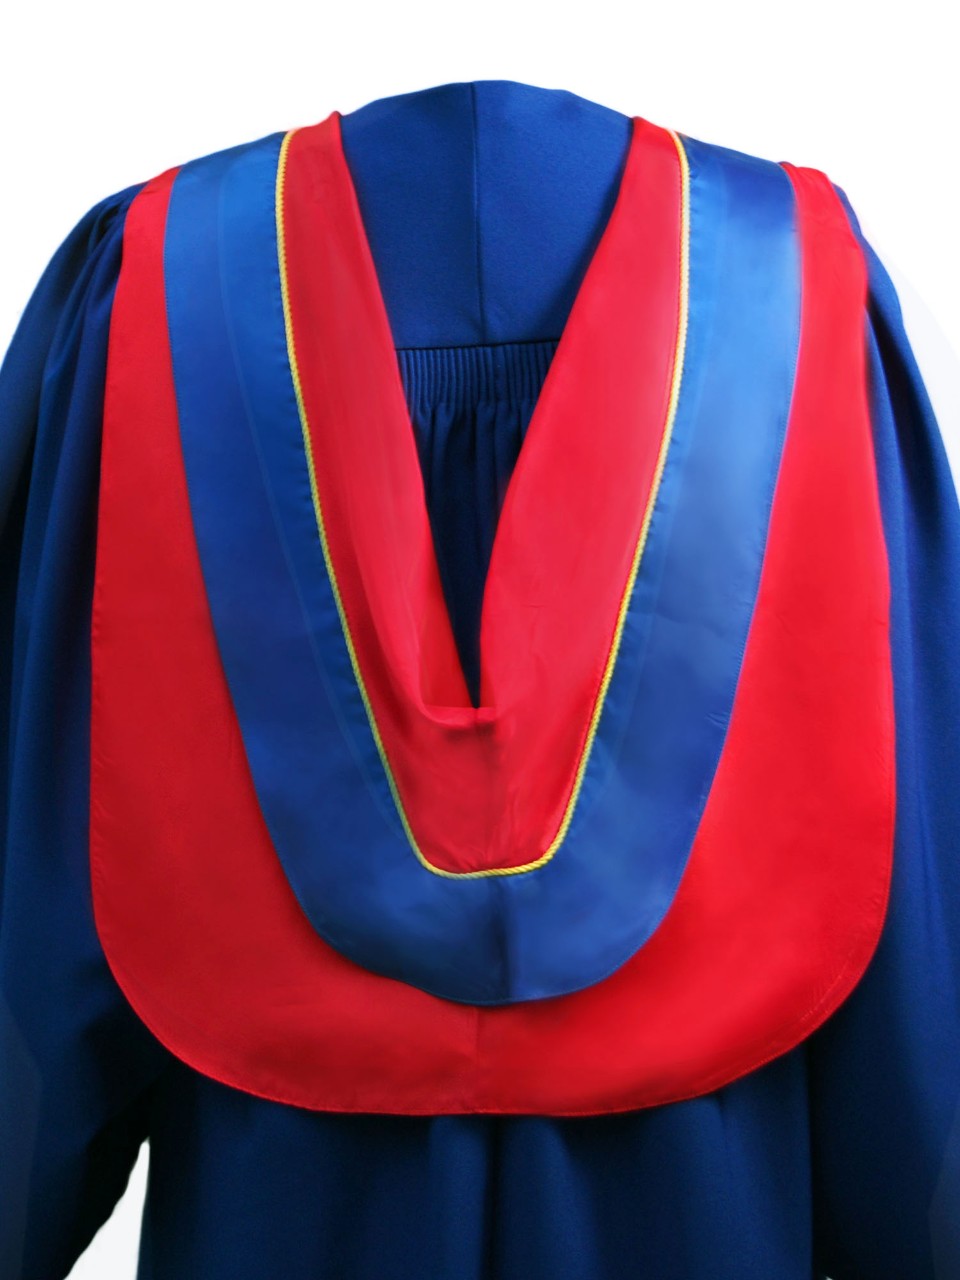 The Master of Publishing hood is red with wide blue border and yellow cording